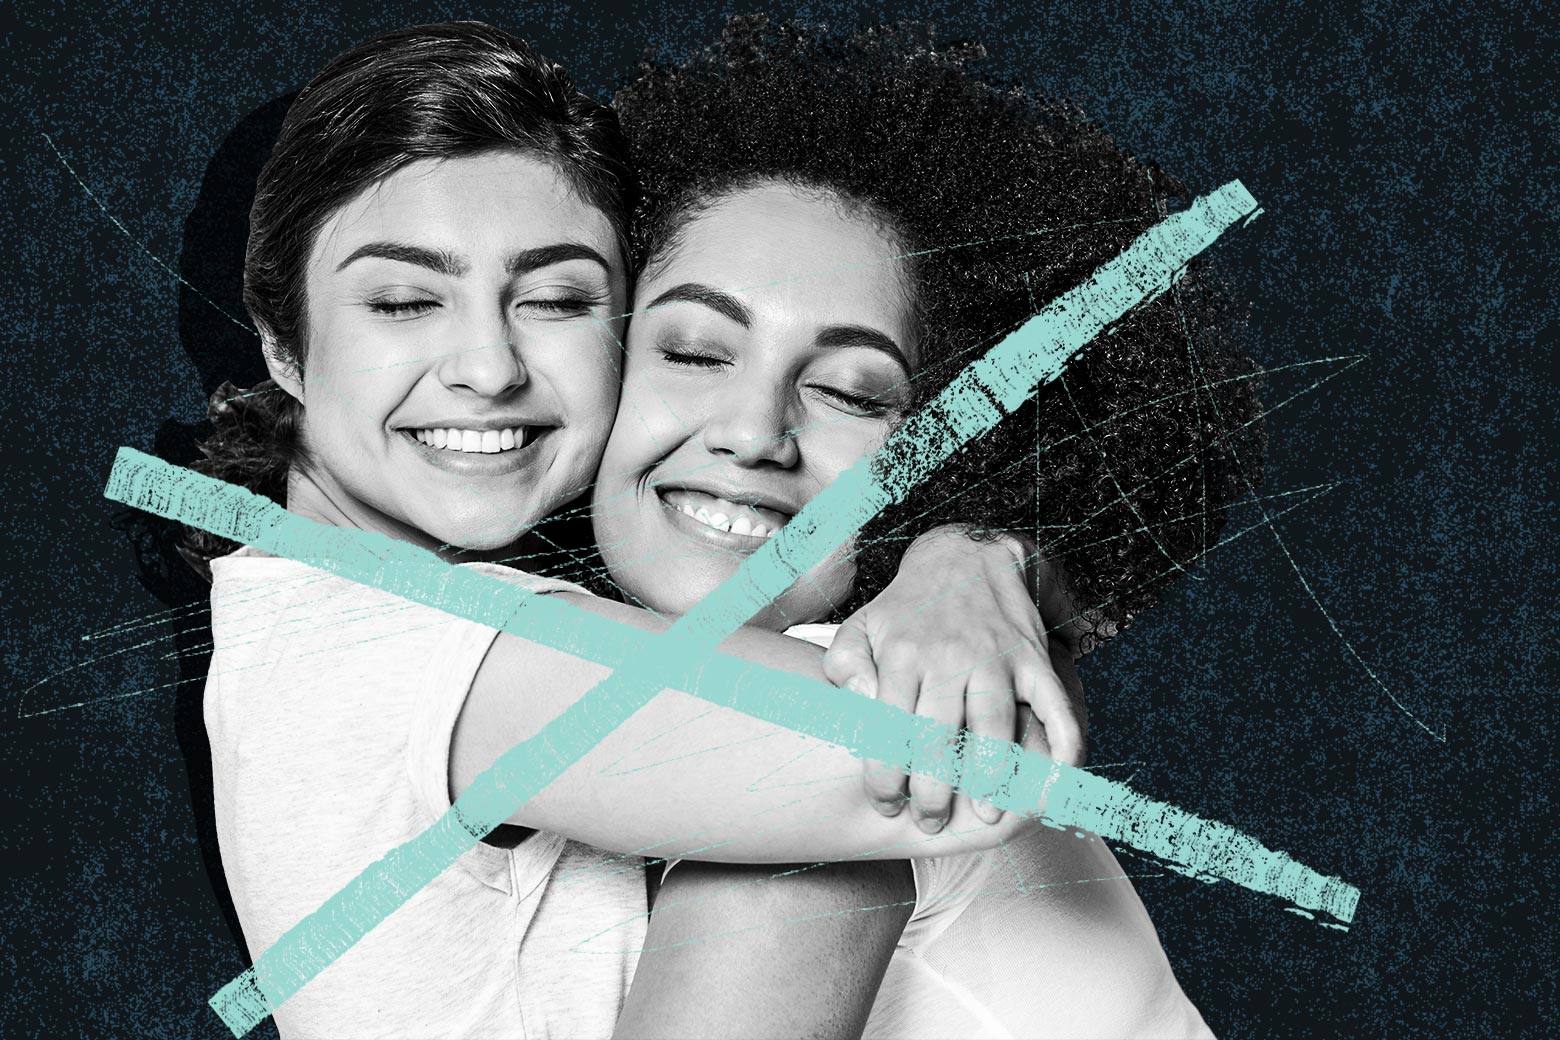 Two women hugging with a teal X over the image.